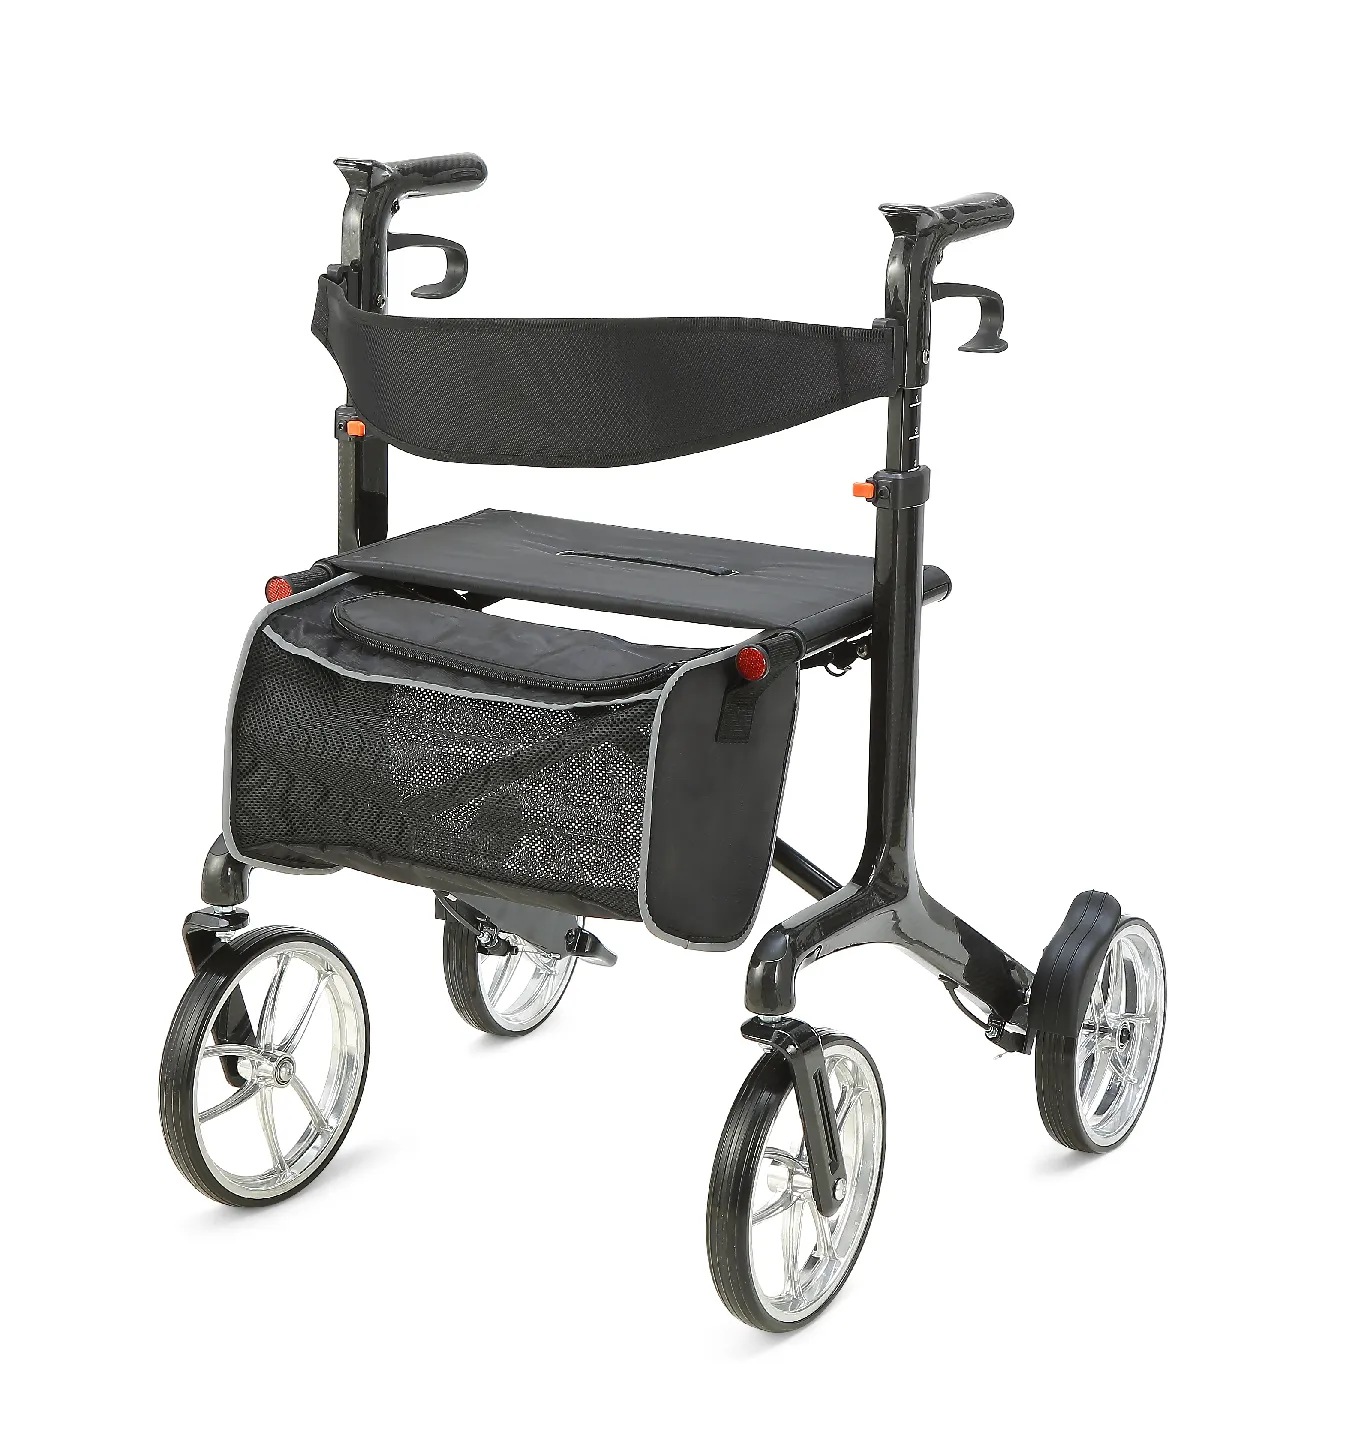 Foshan HCT-9266A New Design Mobility Aids Lightweight Medical Device Four Wheel for Senior Folding Rollator Walker With Seat